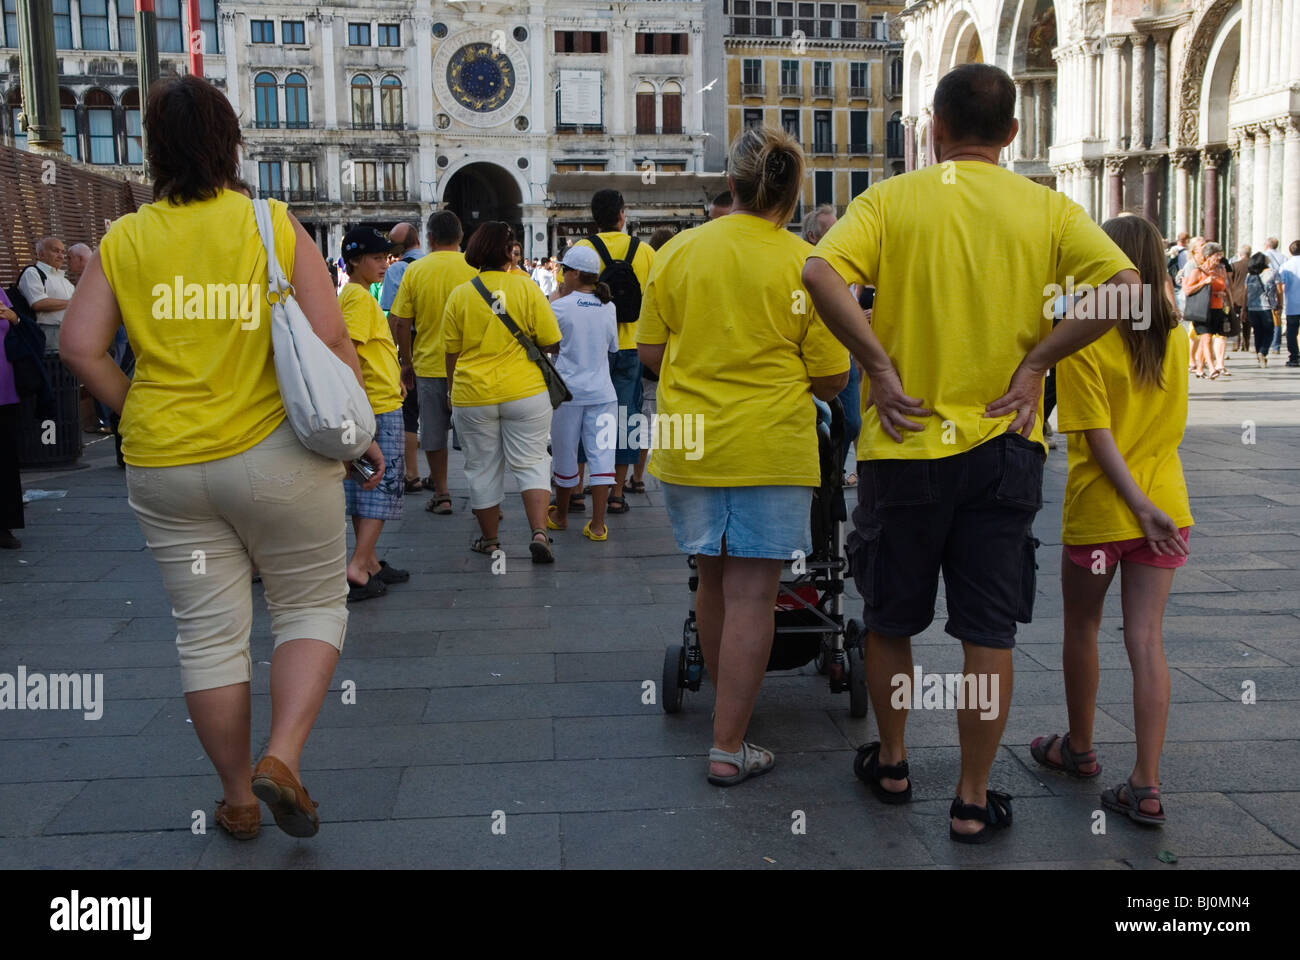 Venice Italy . Tour group in yellow t shirts Saint Marks Square. Piazza San Marco. Stock Photo